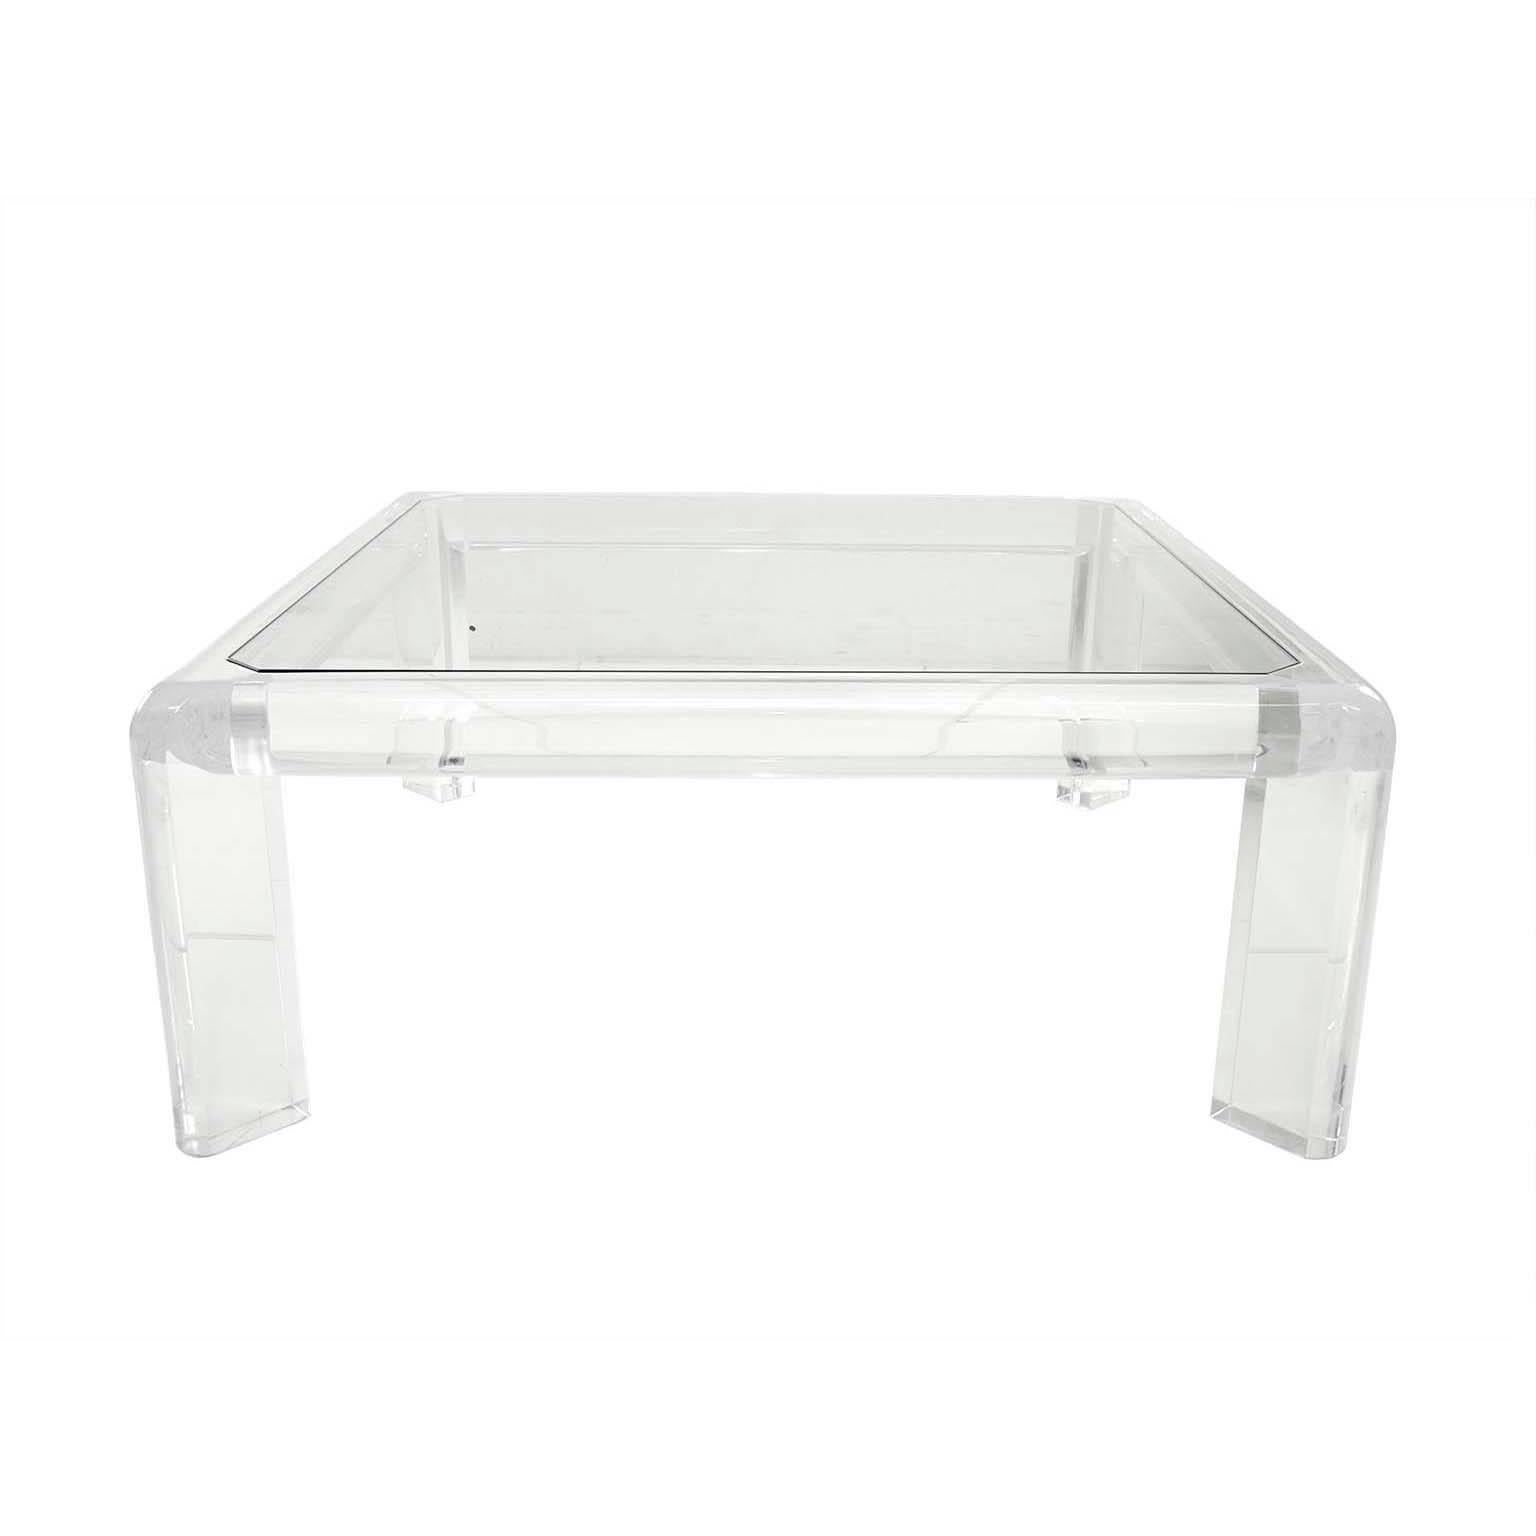 Modshop's homage to the 1960s with the
1960s Lucite and glass coffee table.

Measures: 38.5